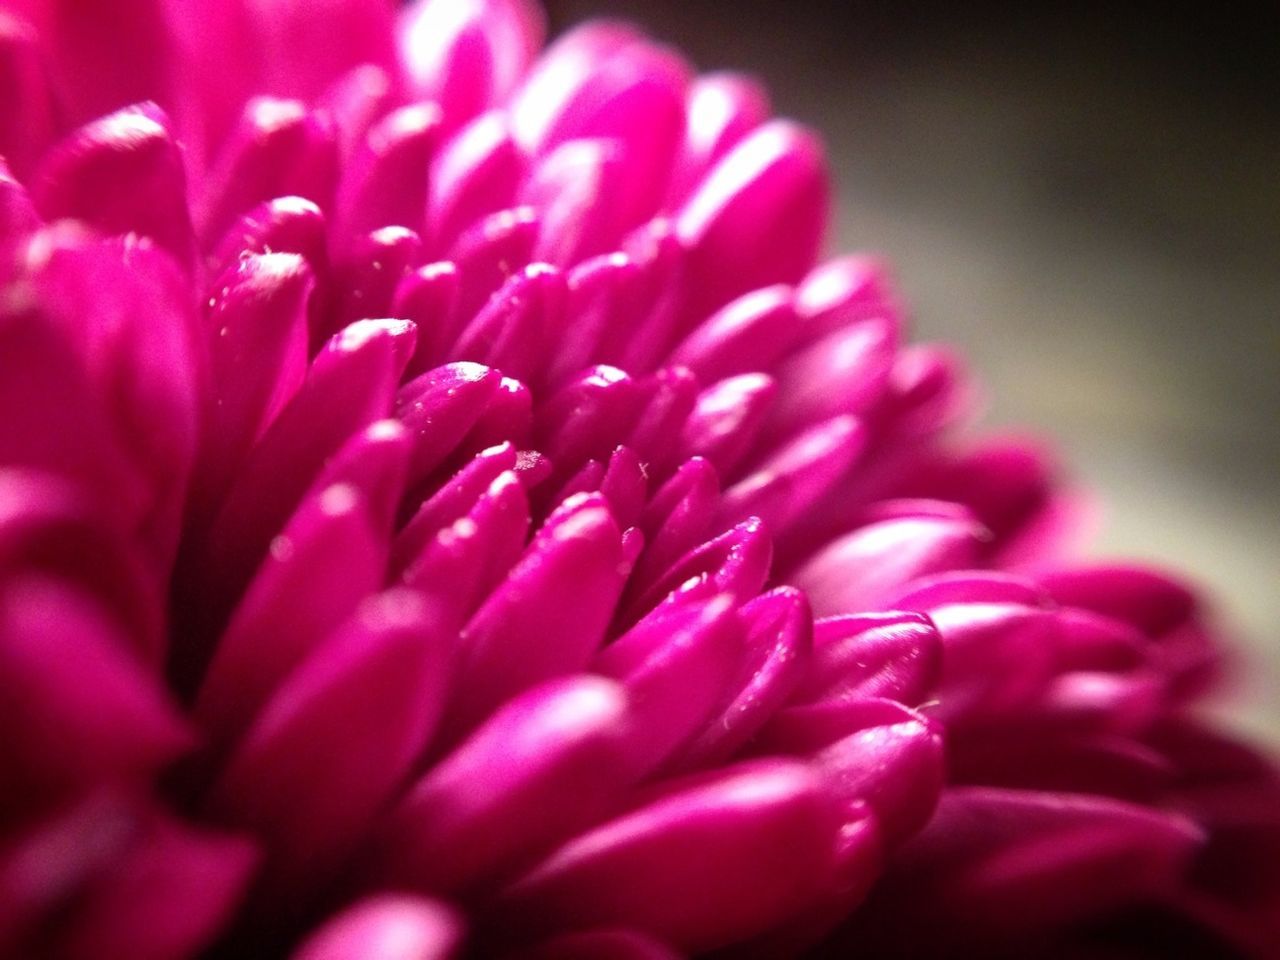 CLOSE-UP OF PINK FLOWERS